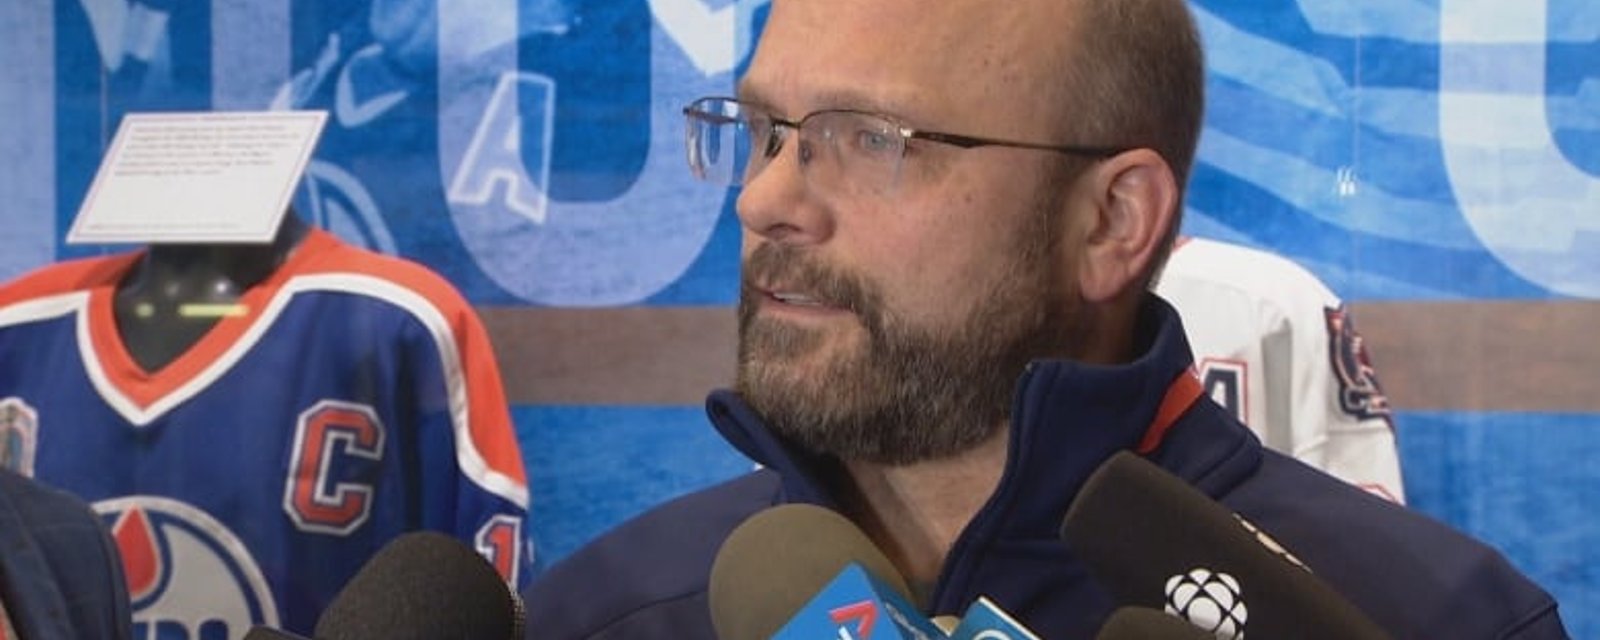 Oilers' Chiarelli looks awfully tired, haggard and worn out: could he want out? 